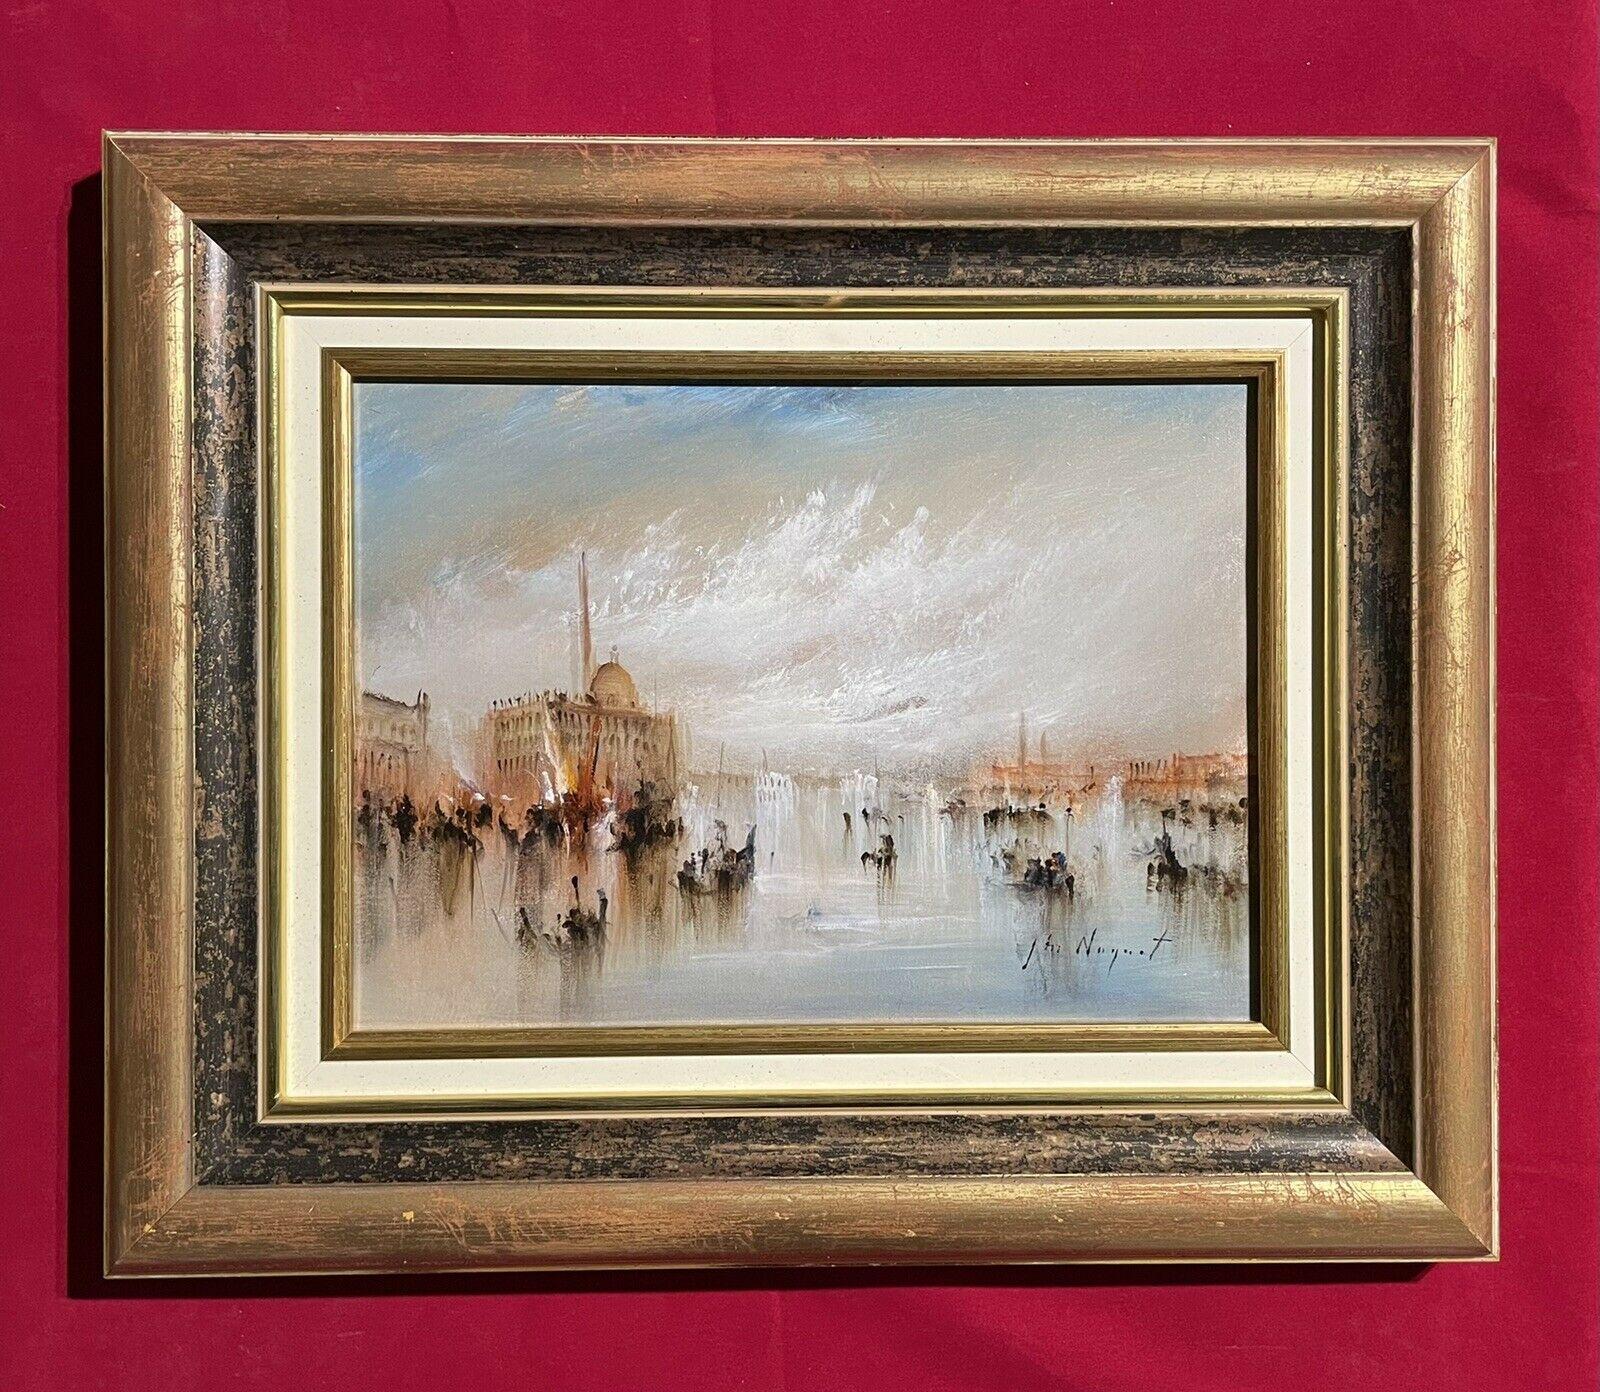 Artist/ School: Jean-Michel Noquet (French 1950-2015), signed

Title: Venice

Medium:  oil painting on canvas, framed.

Size:  painting: 9.5 x 13 inches, frame: 15.75 x 19.25 inches

Provenance: private collection, France

Condition: The painting is